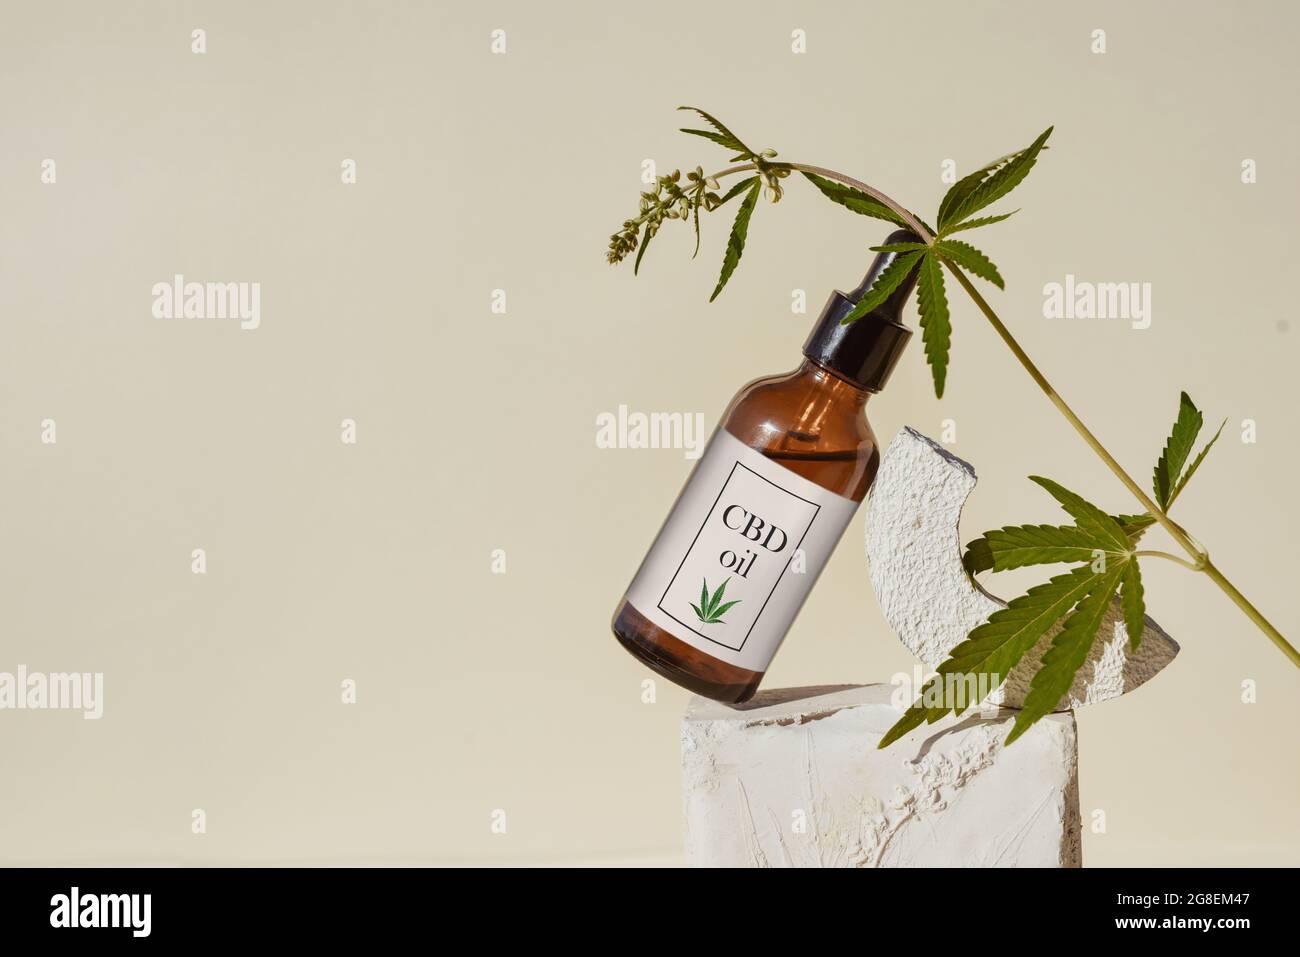 CBD oil in brown bottle with dropper and cannabis branch, hemp on podium Beige background Concept of cosmetics and products with cannabinoid, CBD oil, Stock Photo